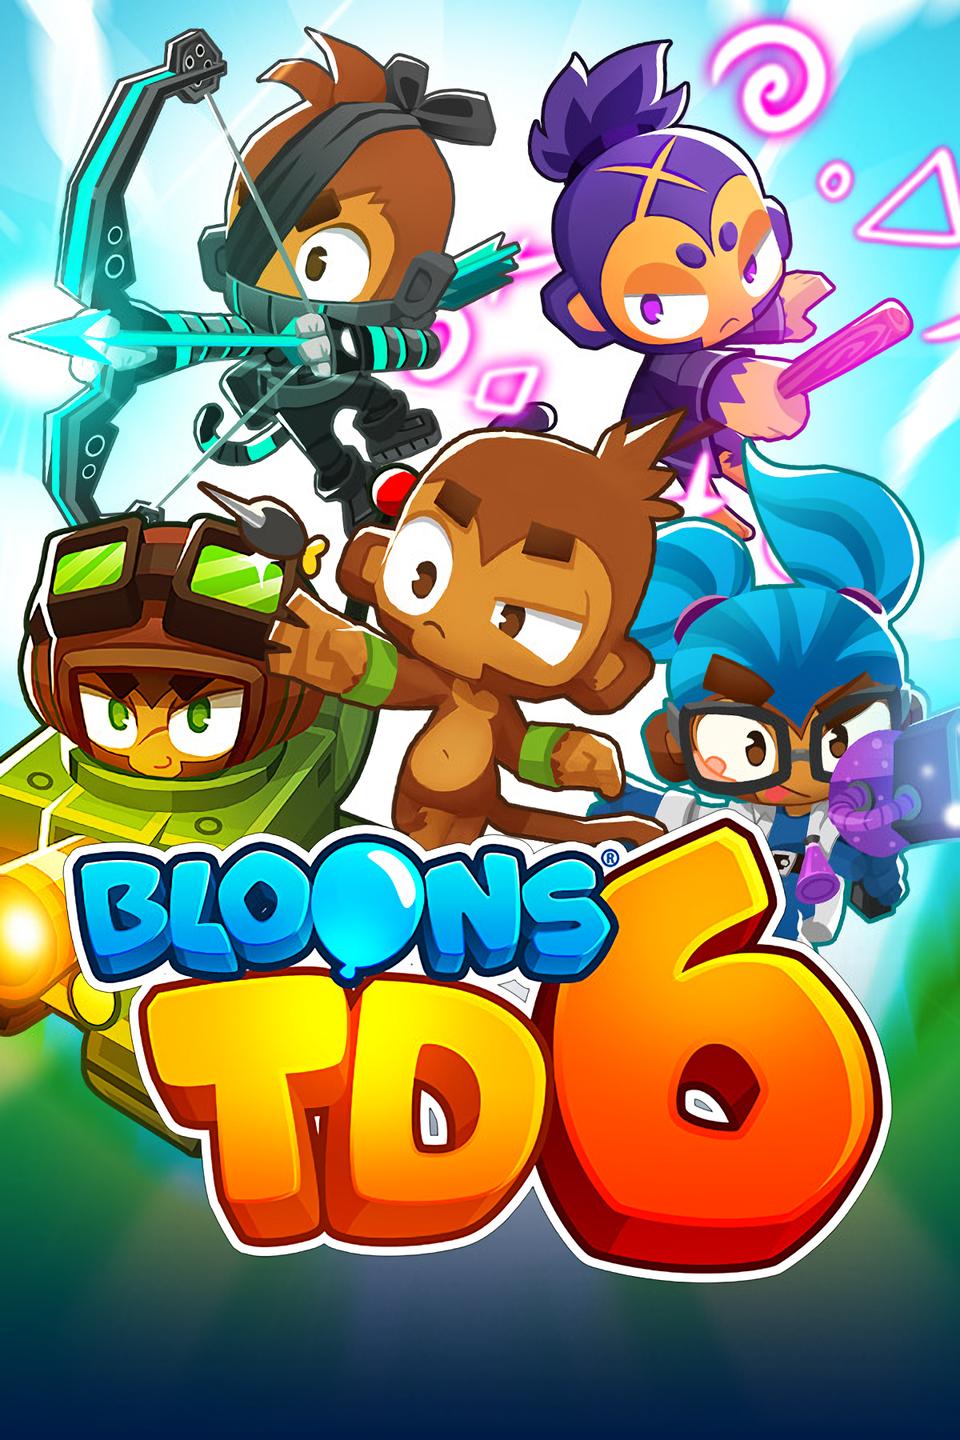 BTD6 Mods - Unlocking New Towers And Features For Free